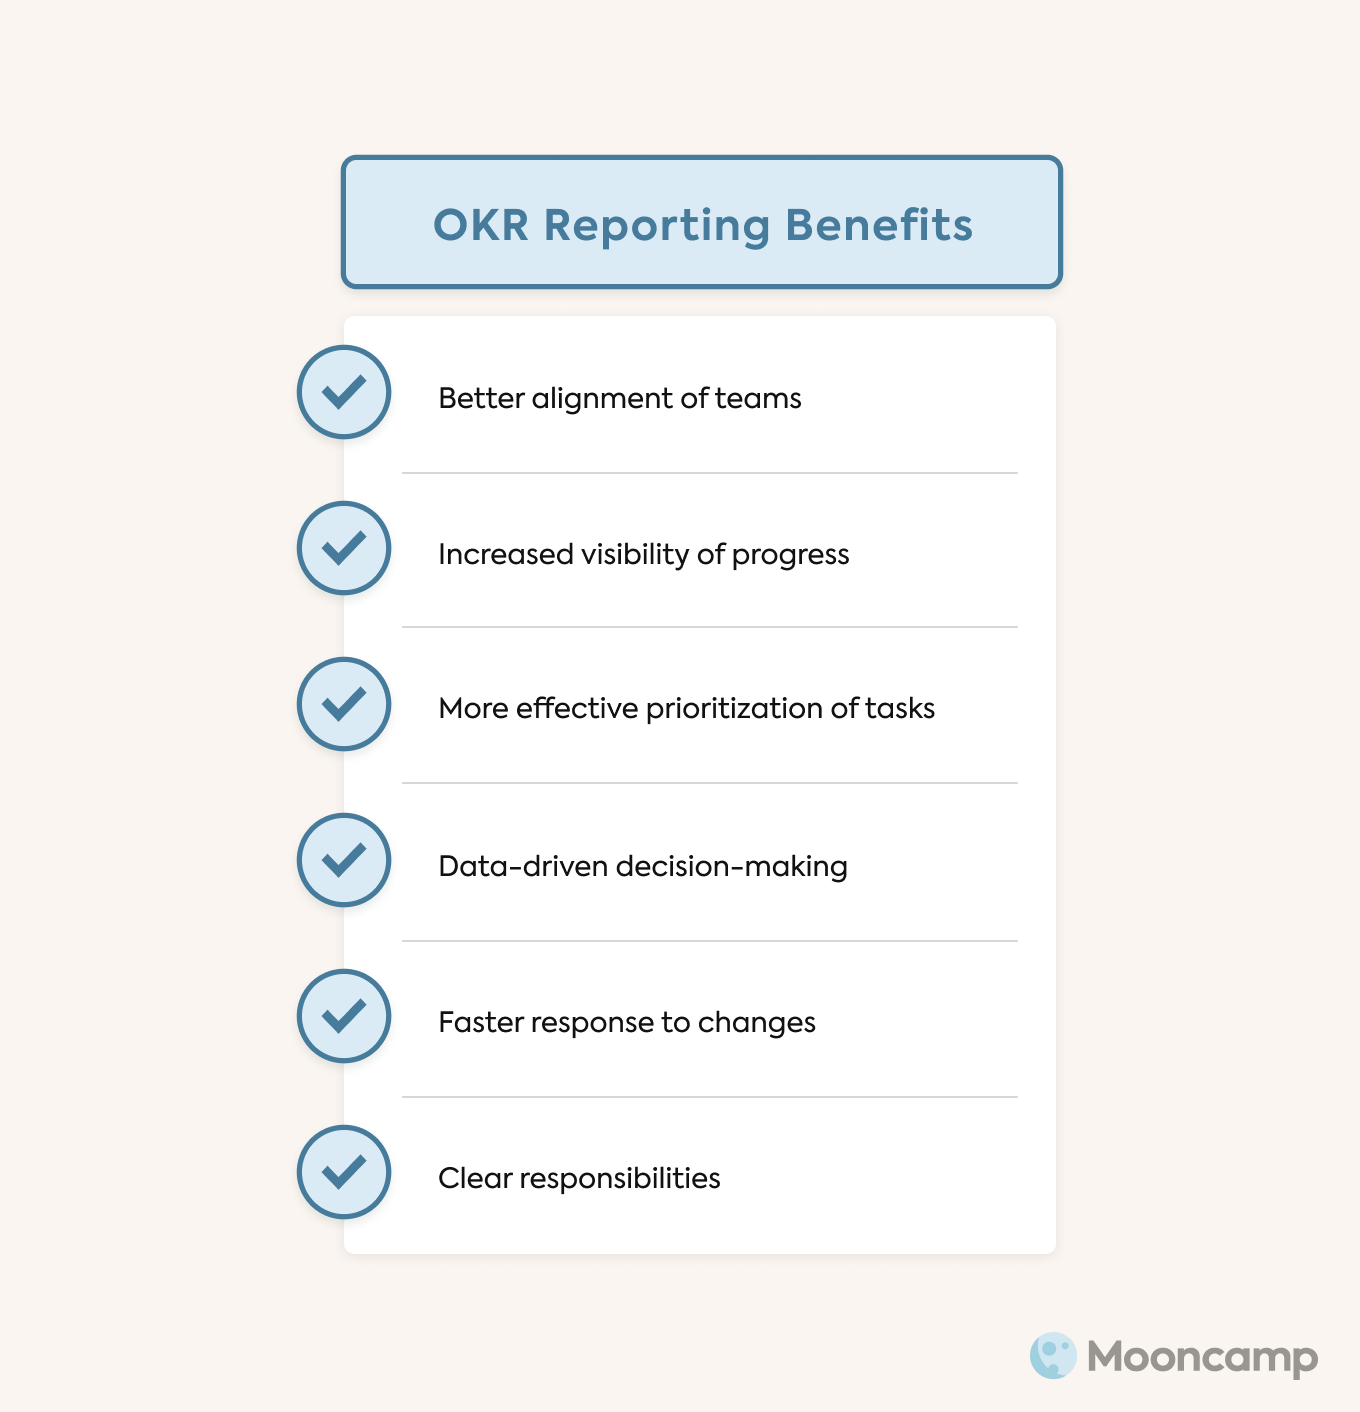 OKR reporting benefits